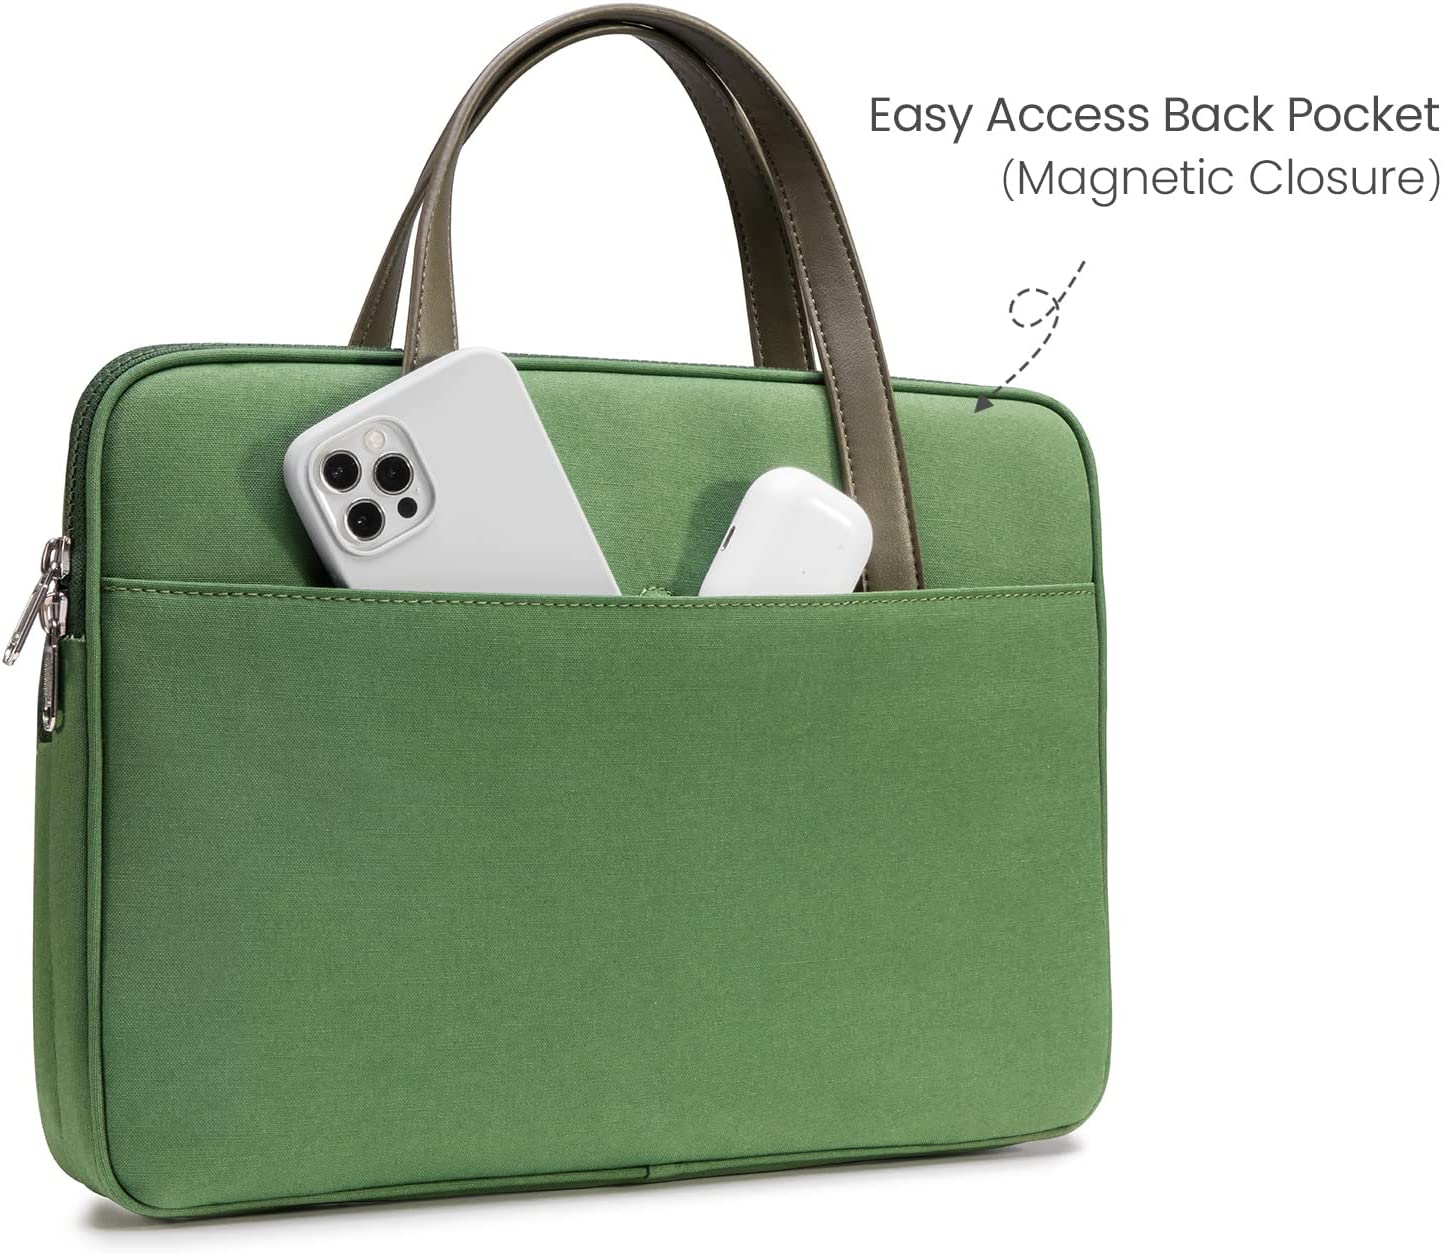 Tomtoc TheHer-H21 Laptop Handbag 16 inch - Green